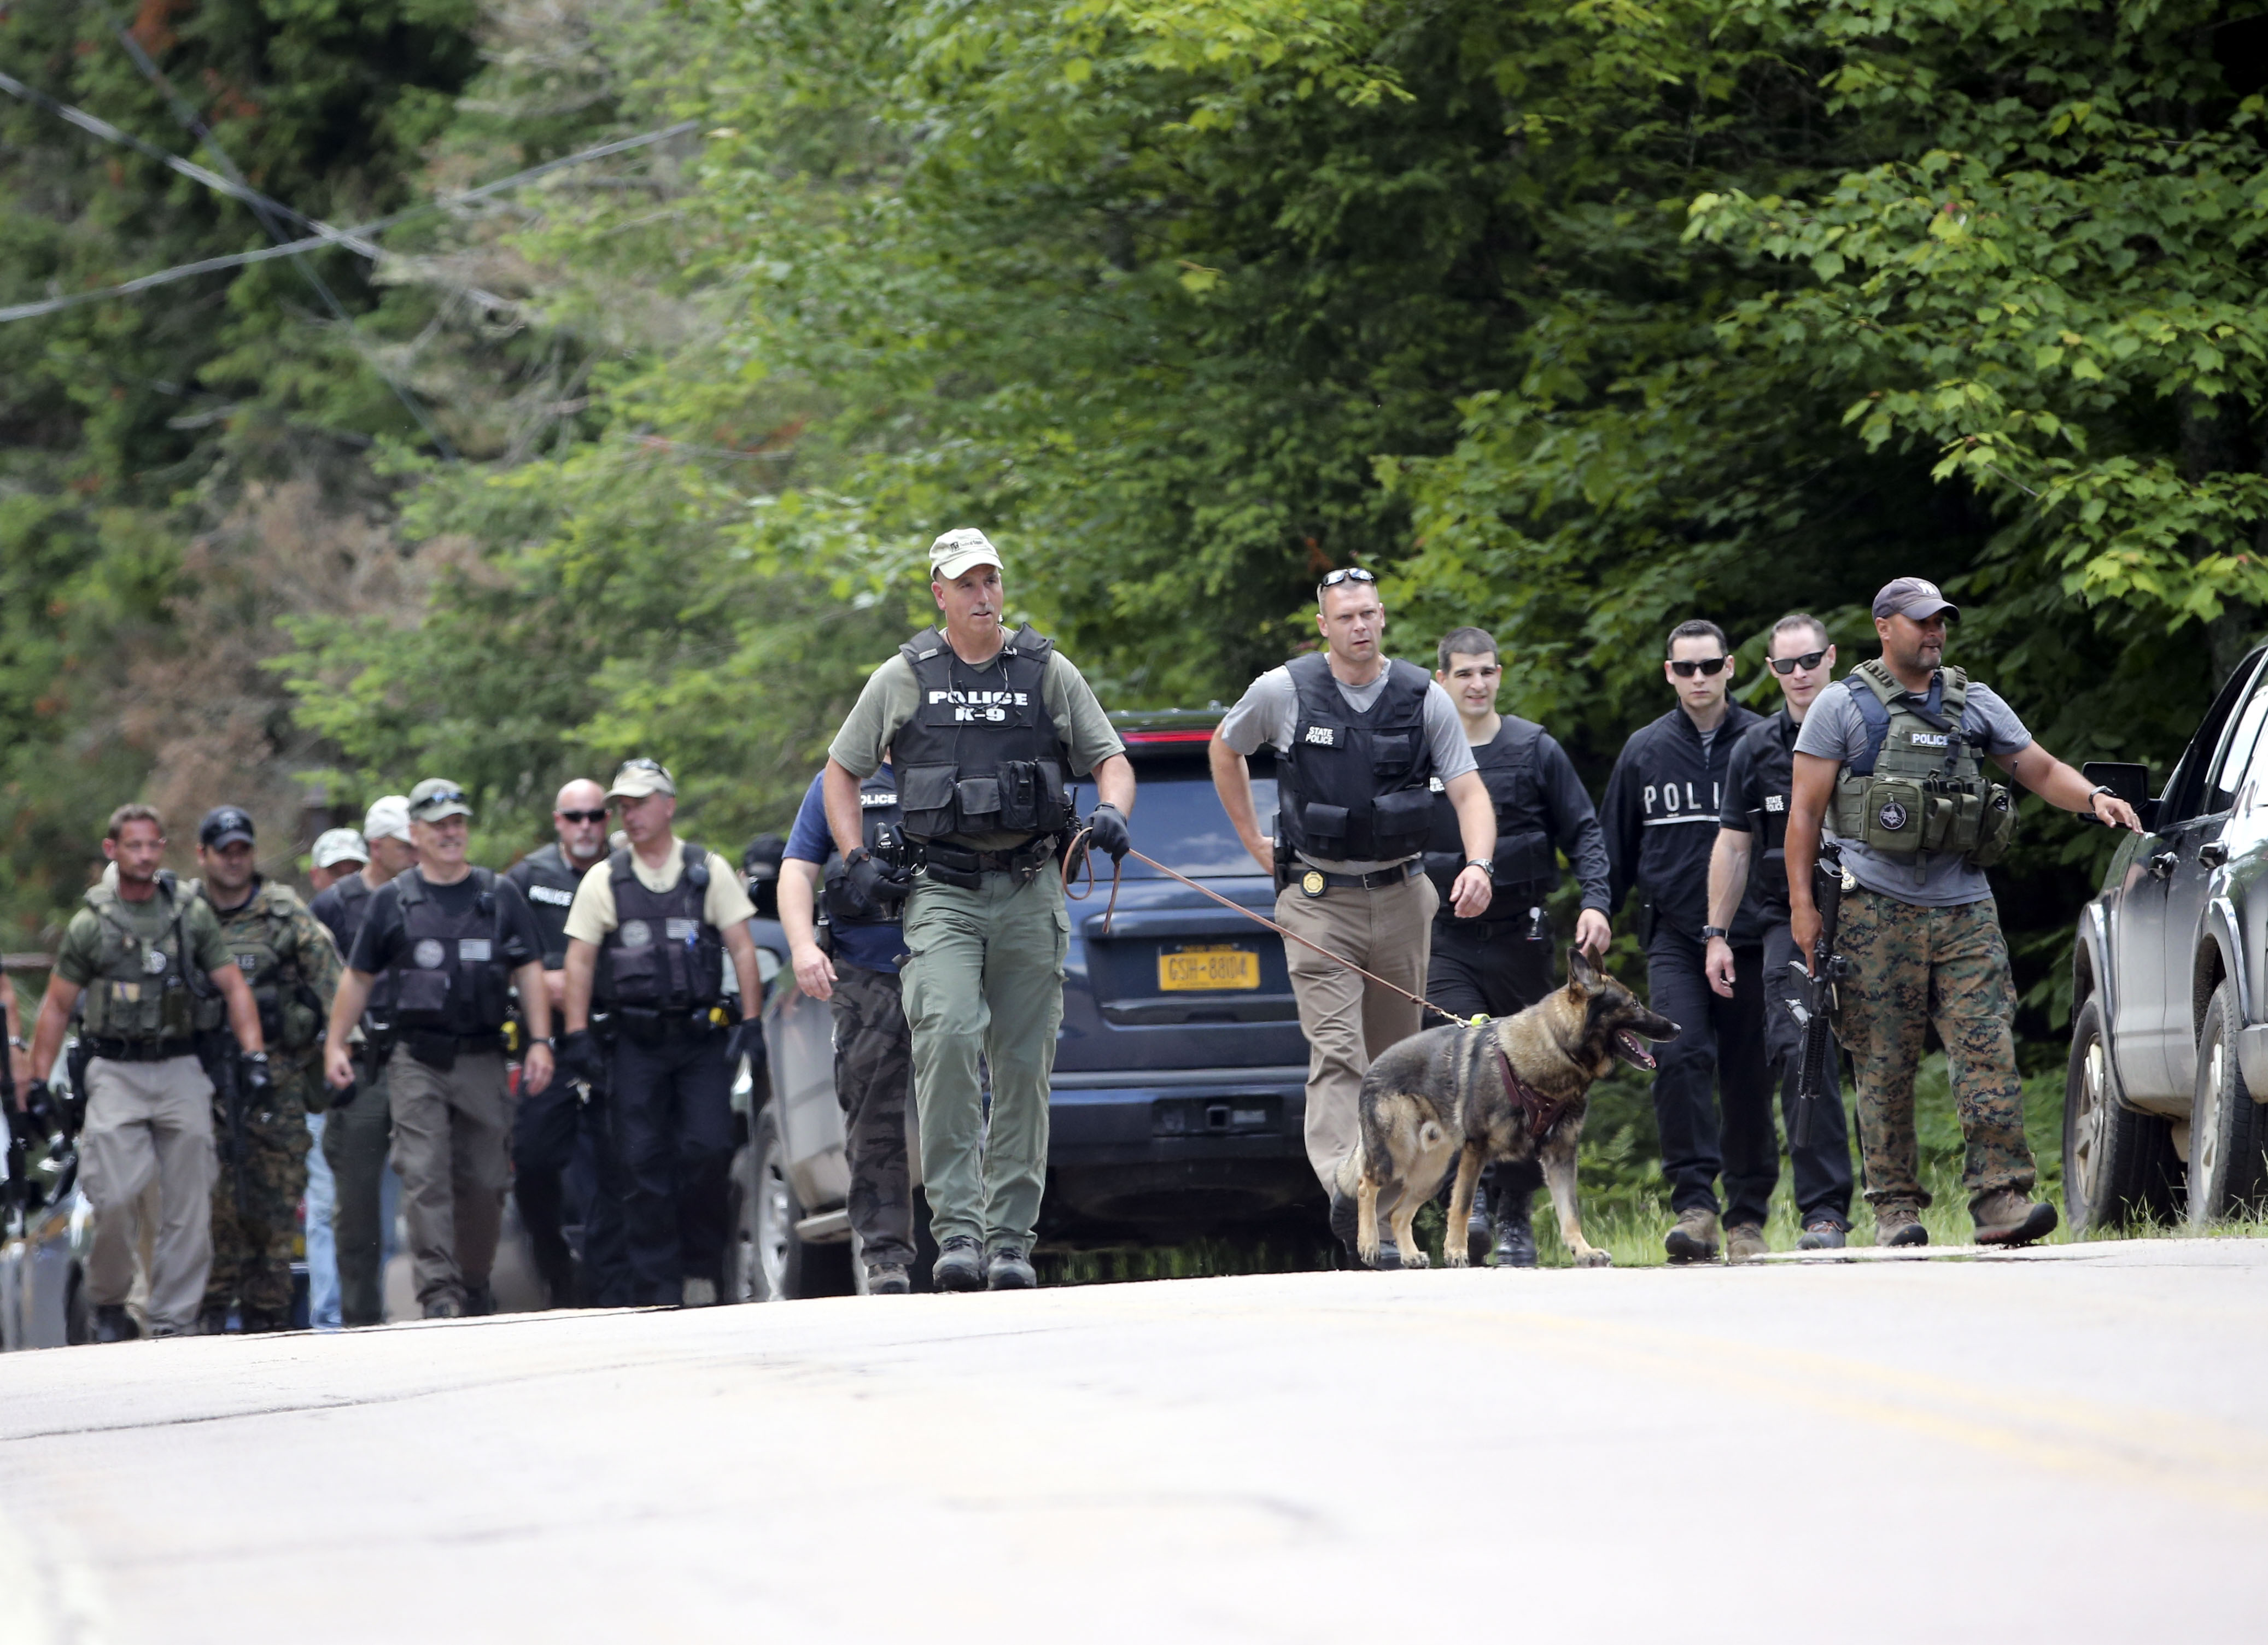 Law enforcement officers walk along a road as the search continues for two escaped prisoners from the Clinton Correctional Facility in Dannemora, on Monday, June 22, 2015 (Mike Groll—AP)